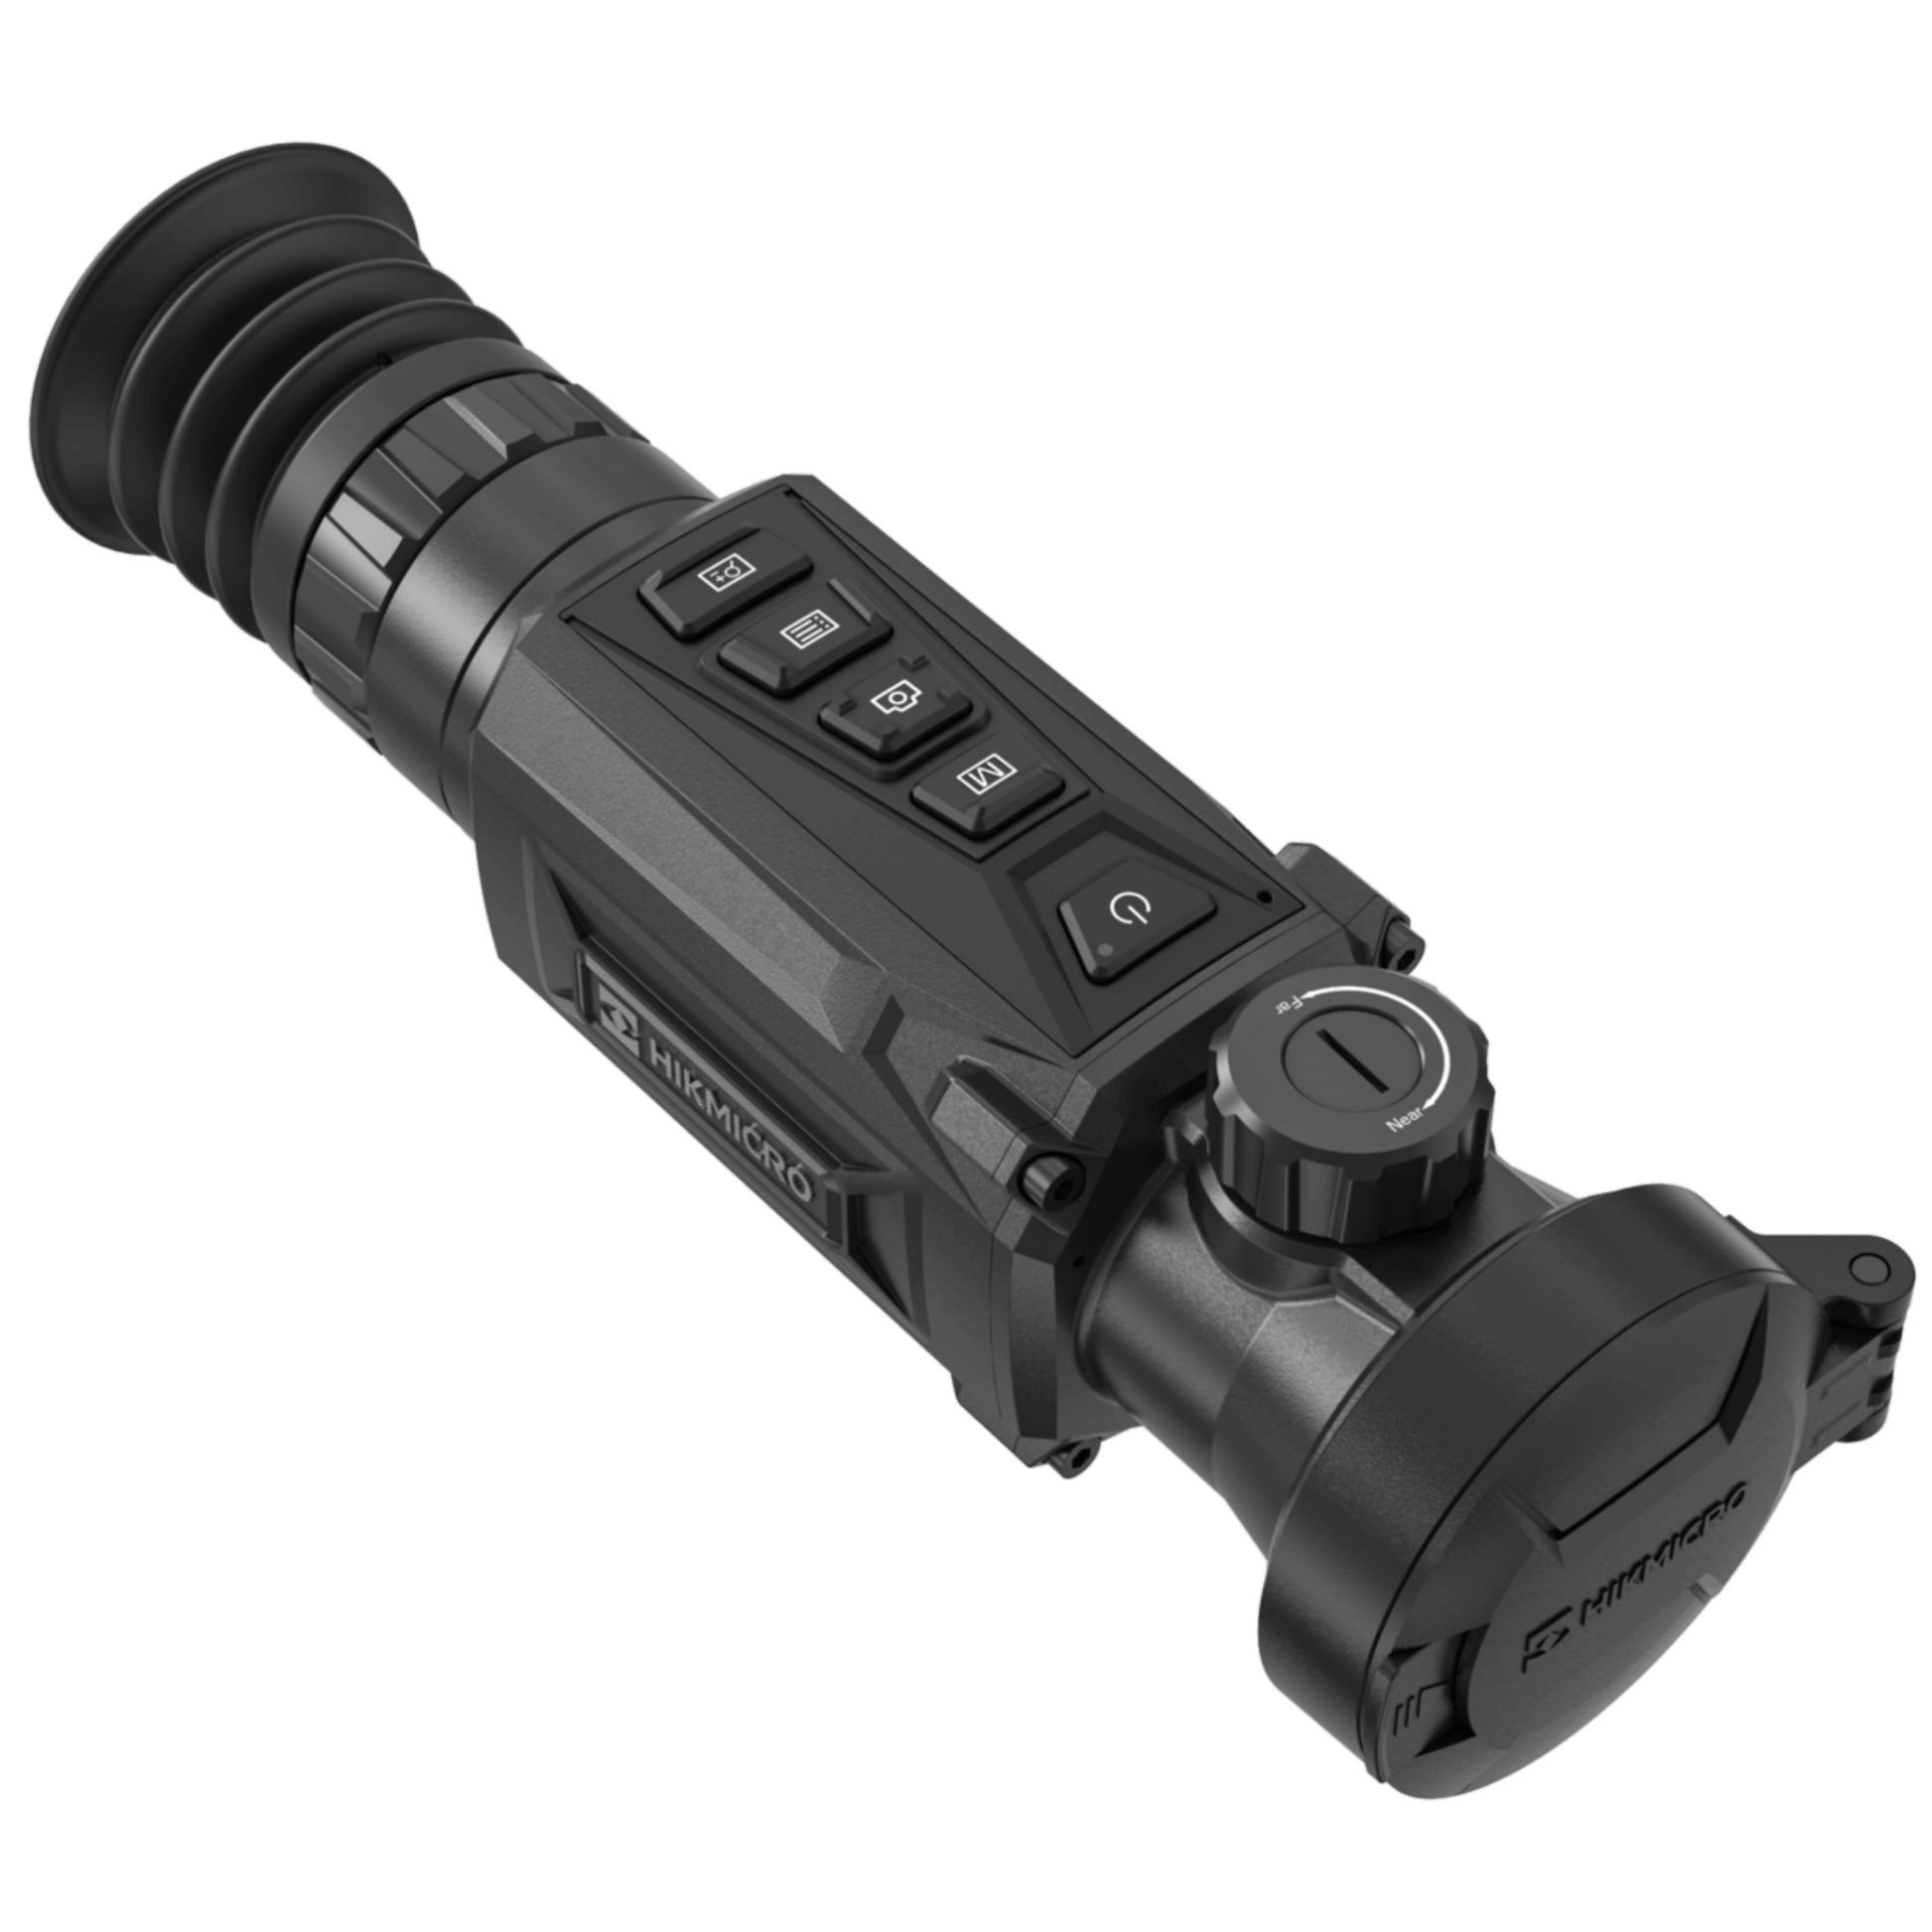 HikMicro Thunder 2.0 TQ50 Handheld Thermal Scope Front Right View From Above with Lens Cape in Place